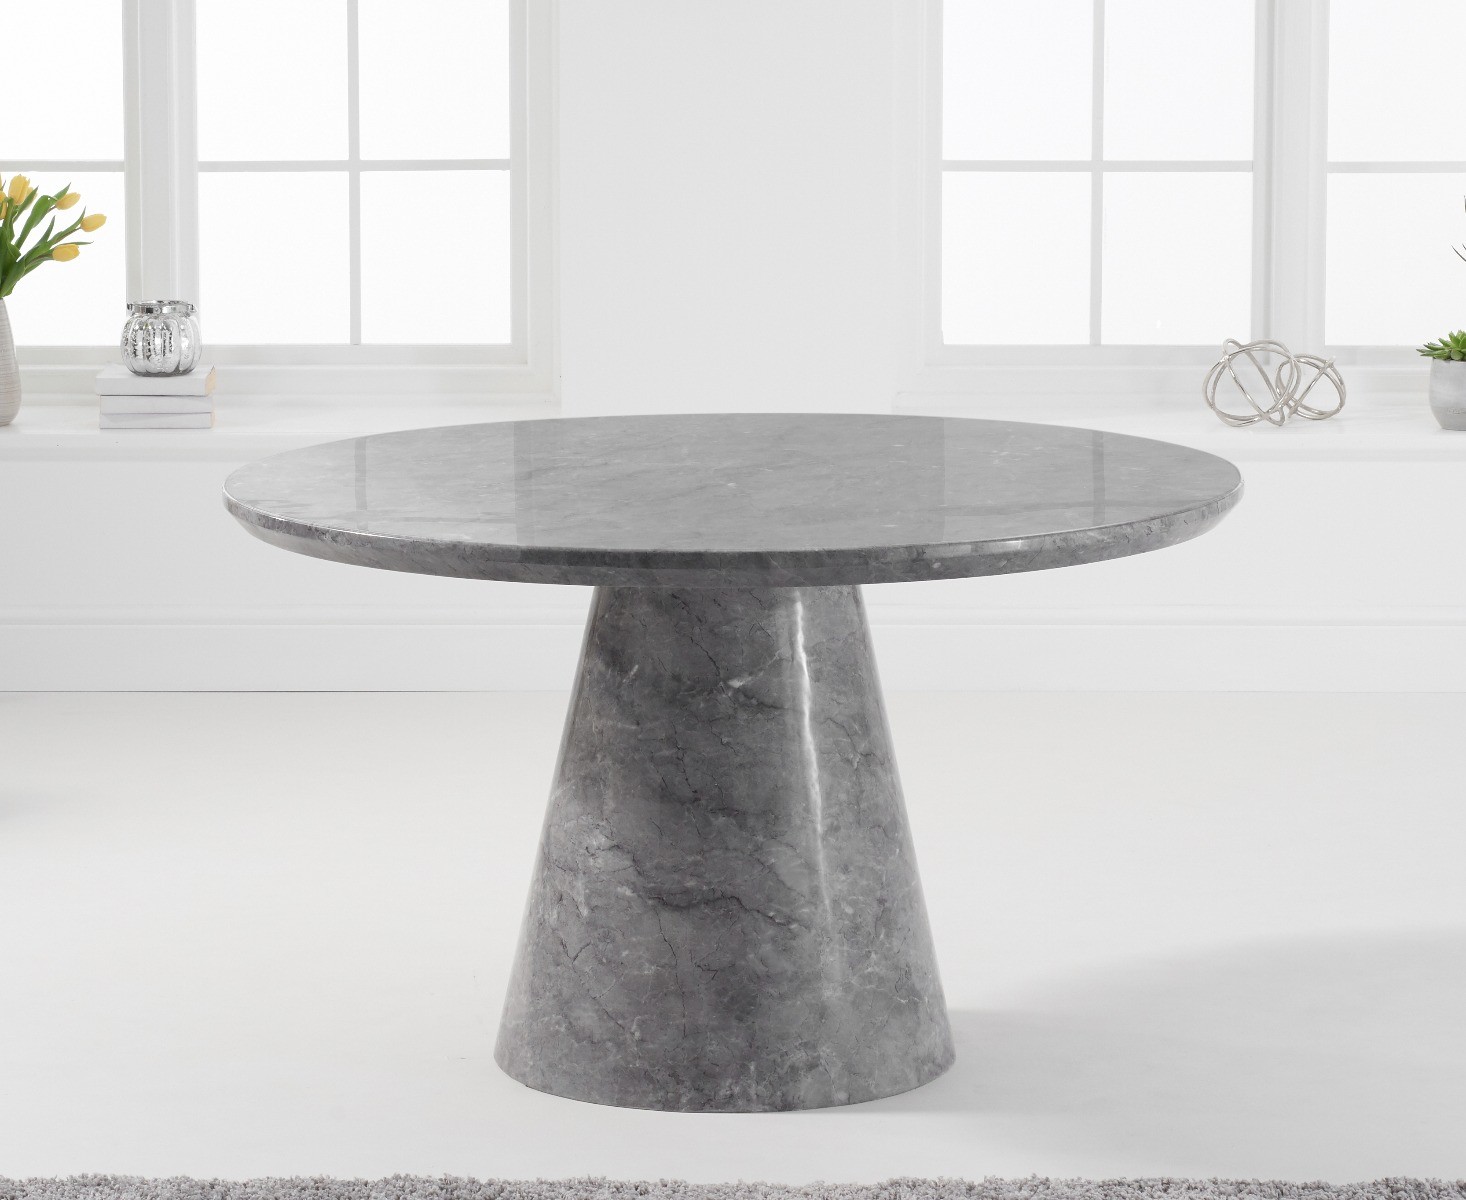 Photo 1 of Ravello 130cm round grey marble dining table with 6 grey aldo chairs